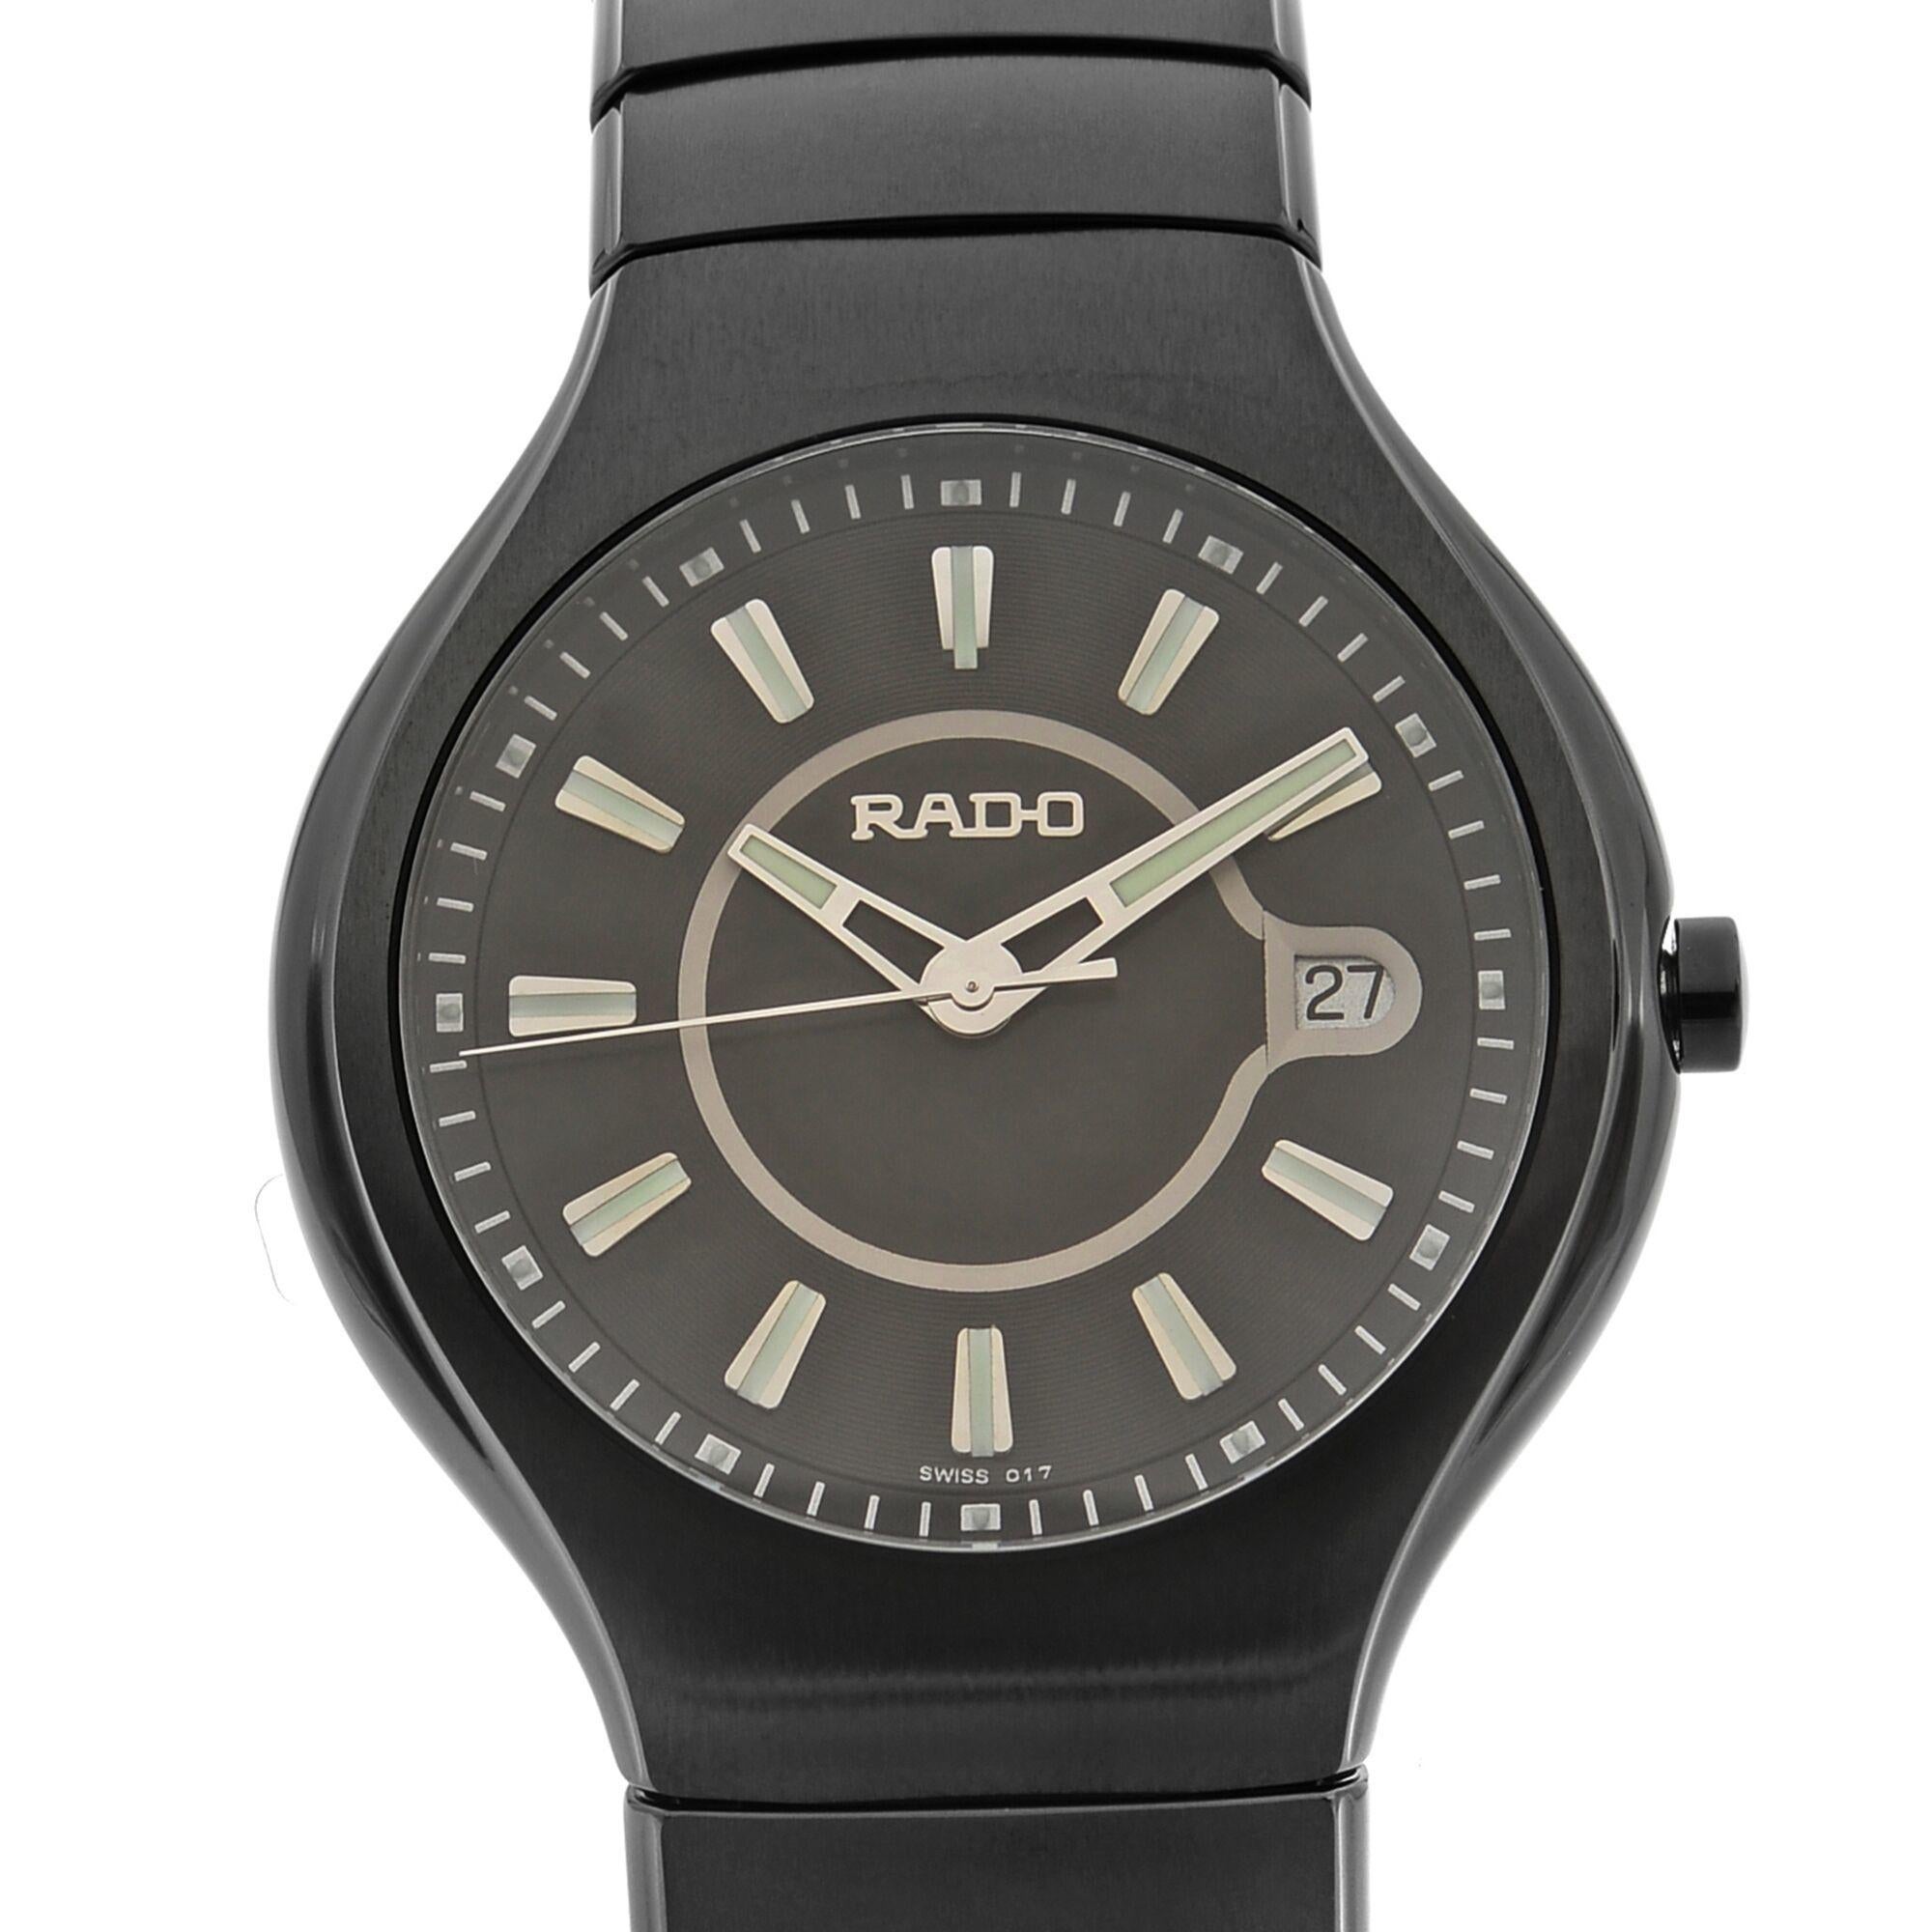 This brand new Rado True R27677172 is a beautiful men's timepiece that is powered by quartz (battery) movement which is cased in a ceramic case. It has a round shape face, date indicator dial and has hand sticks style markers. It is completed with a